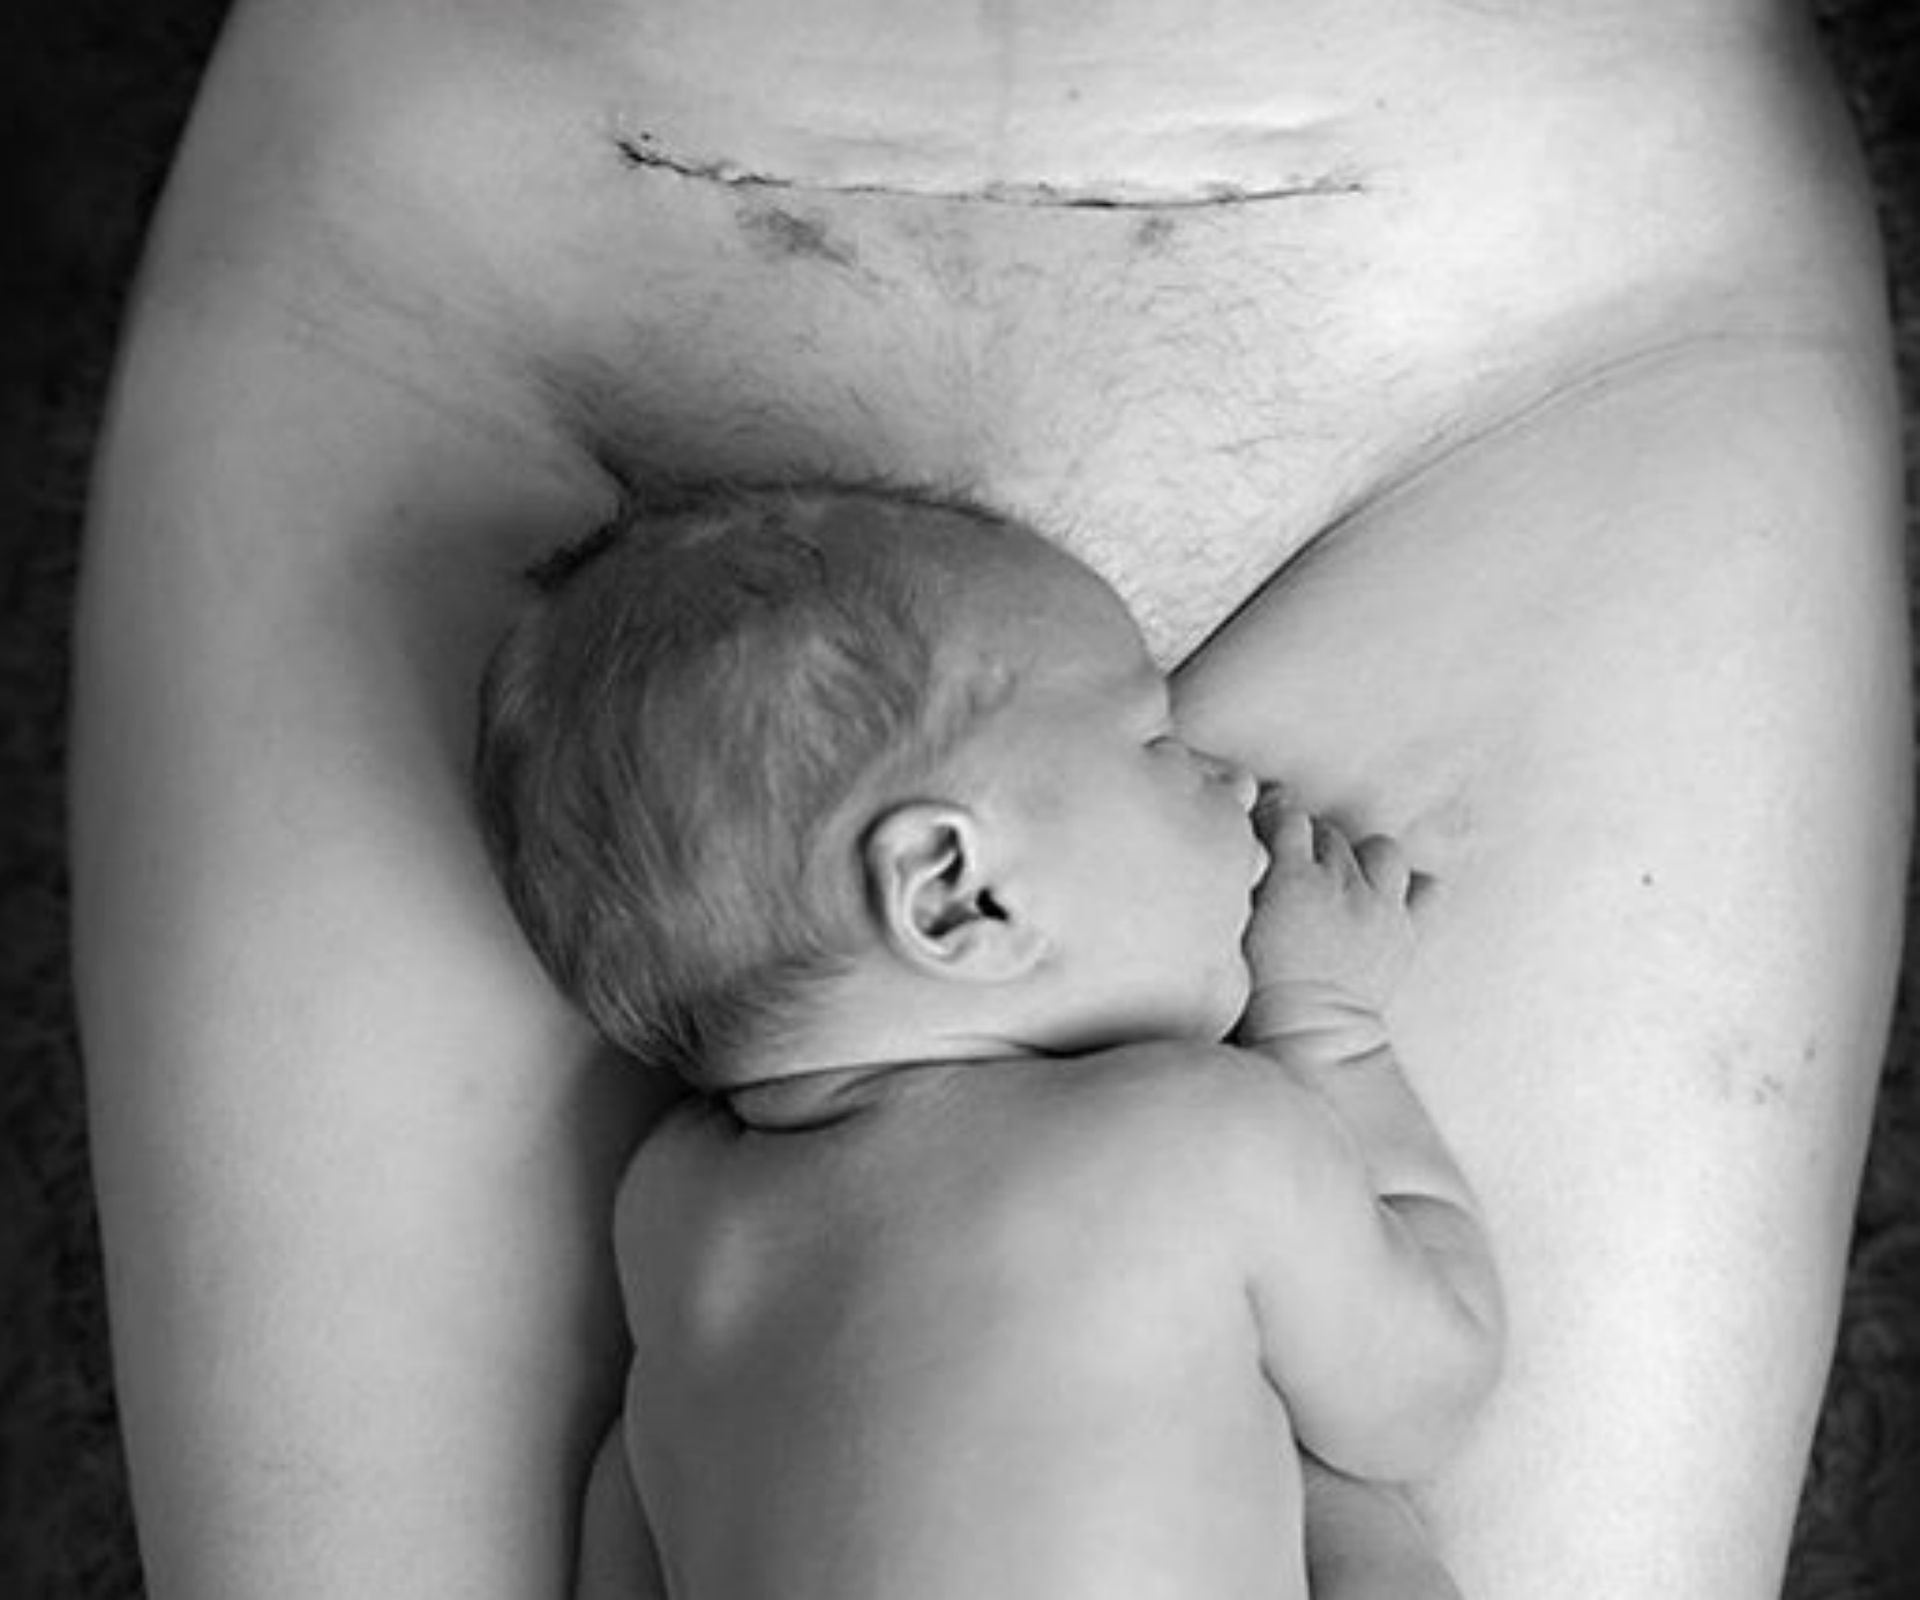 The photo changing people’s views on c-sections